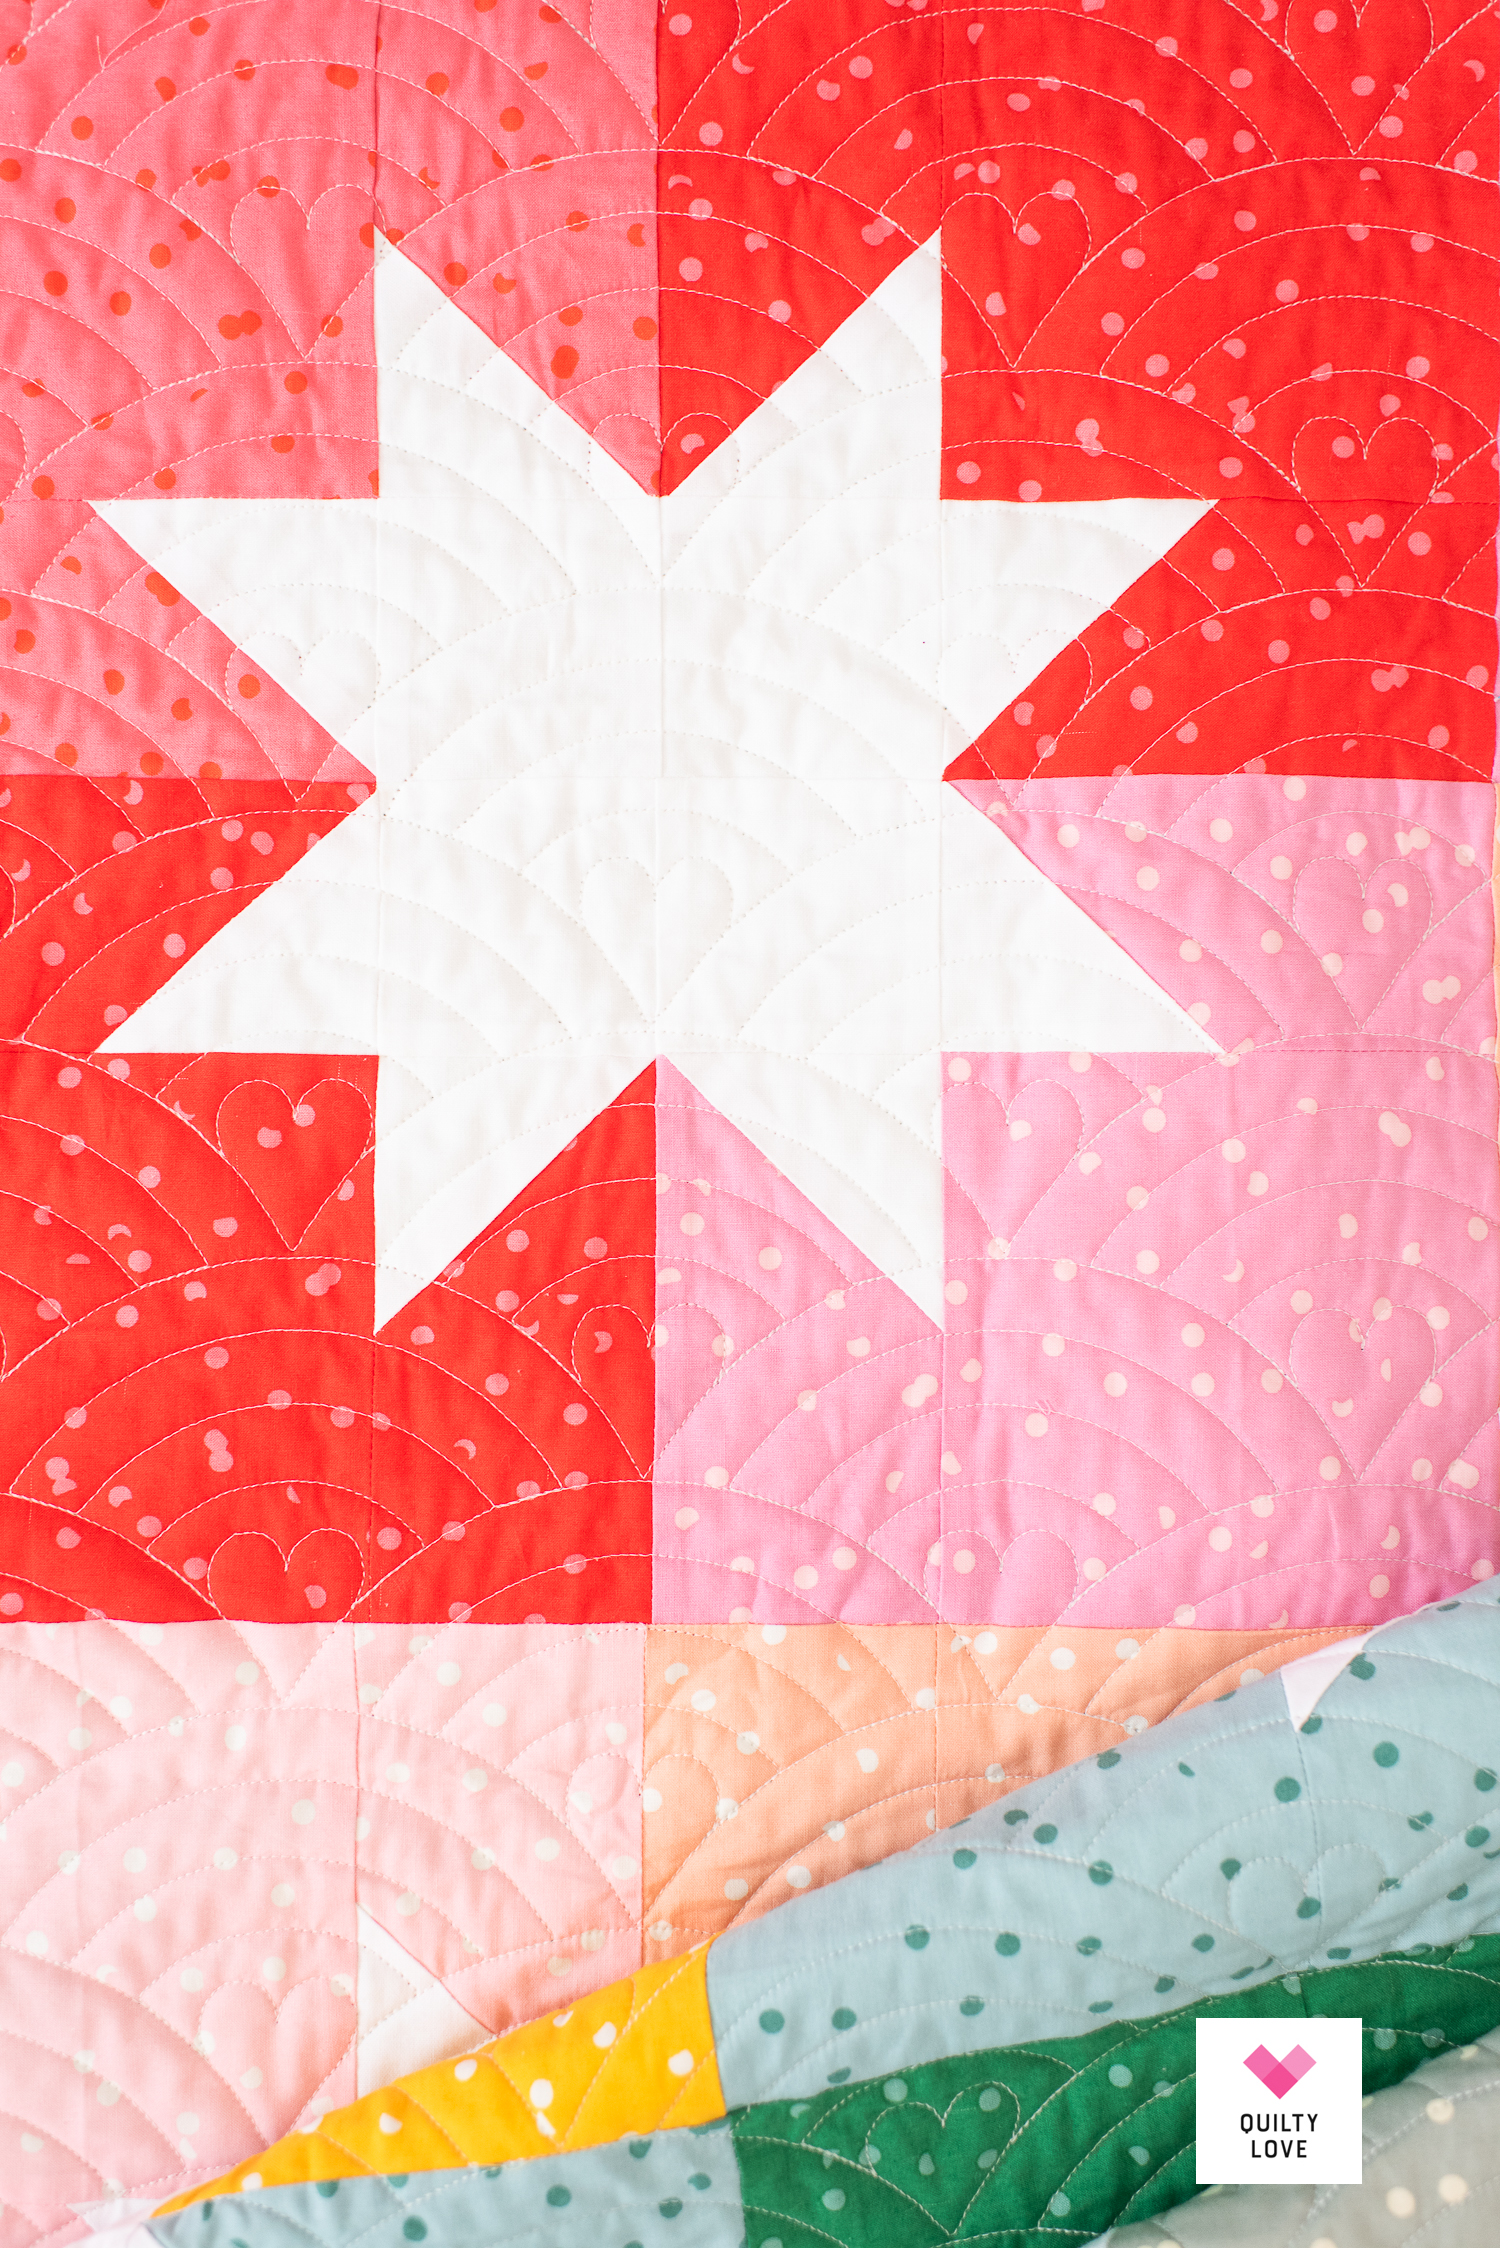 Hole Punch in Pecan- Ruby Star Society – Rosie Girl Quilting